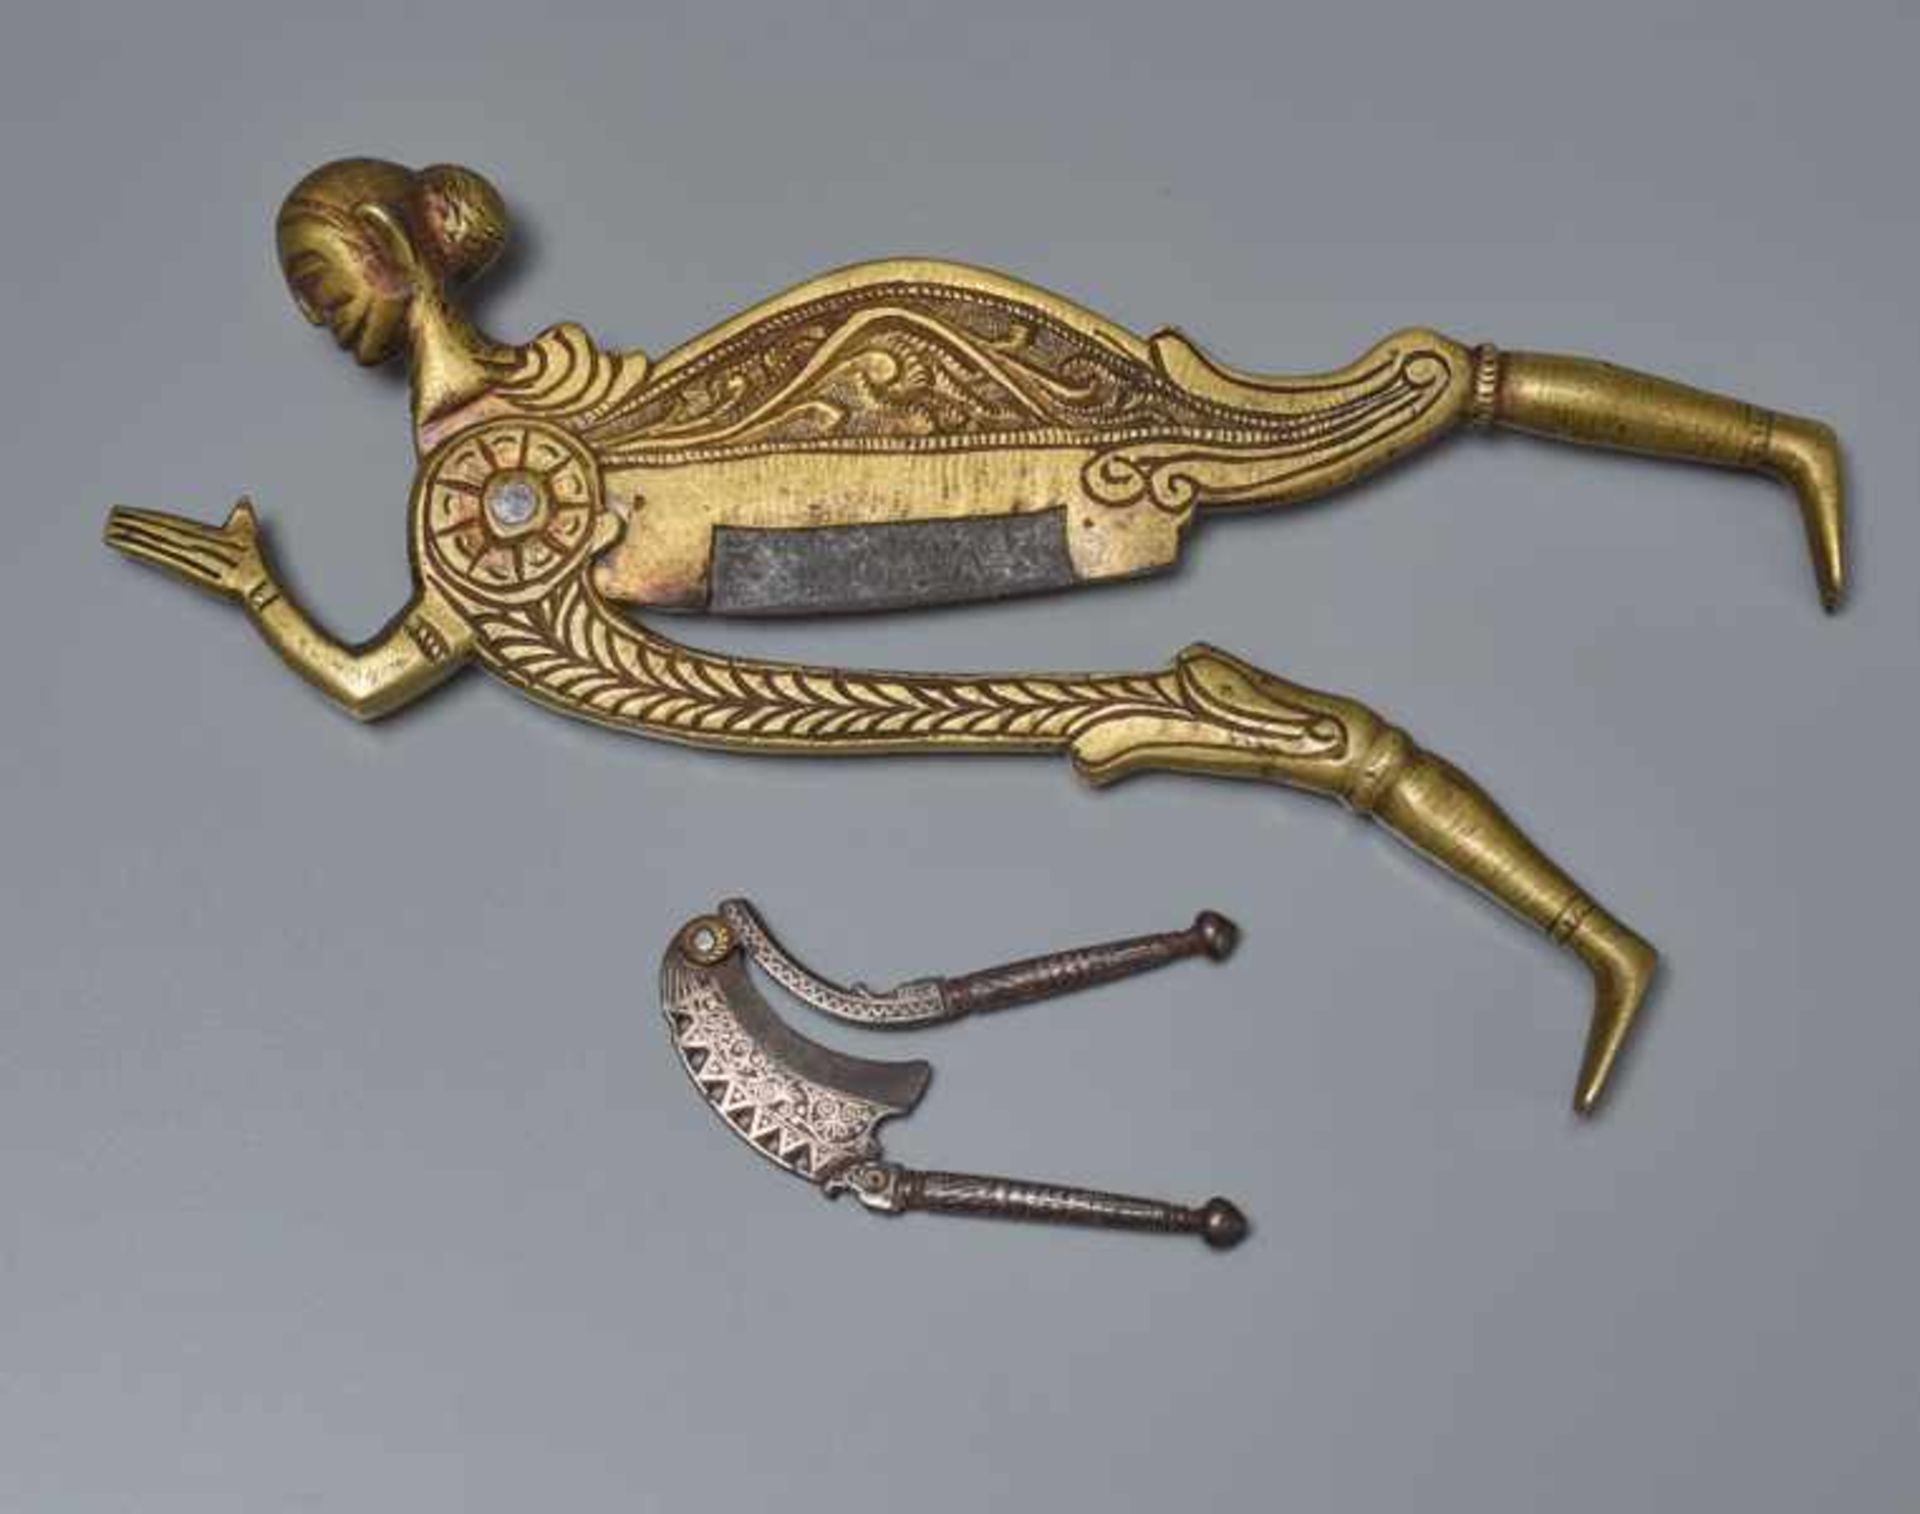 TWO BETEL NUTCRACKERS Brass and iron. Southern India, 19th cent.The first nutcracker is